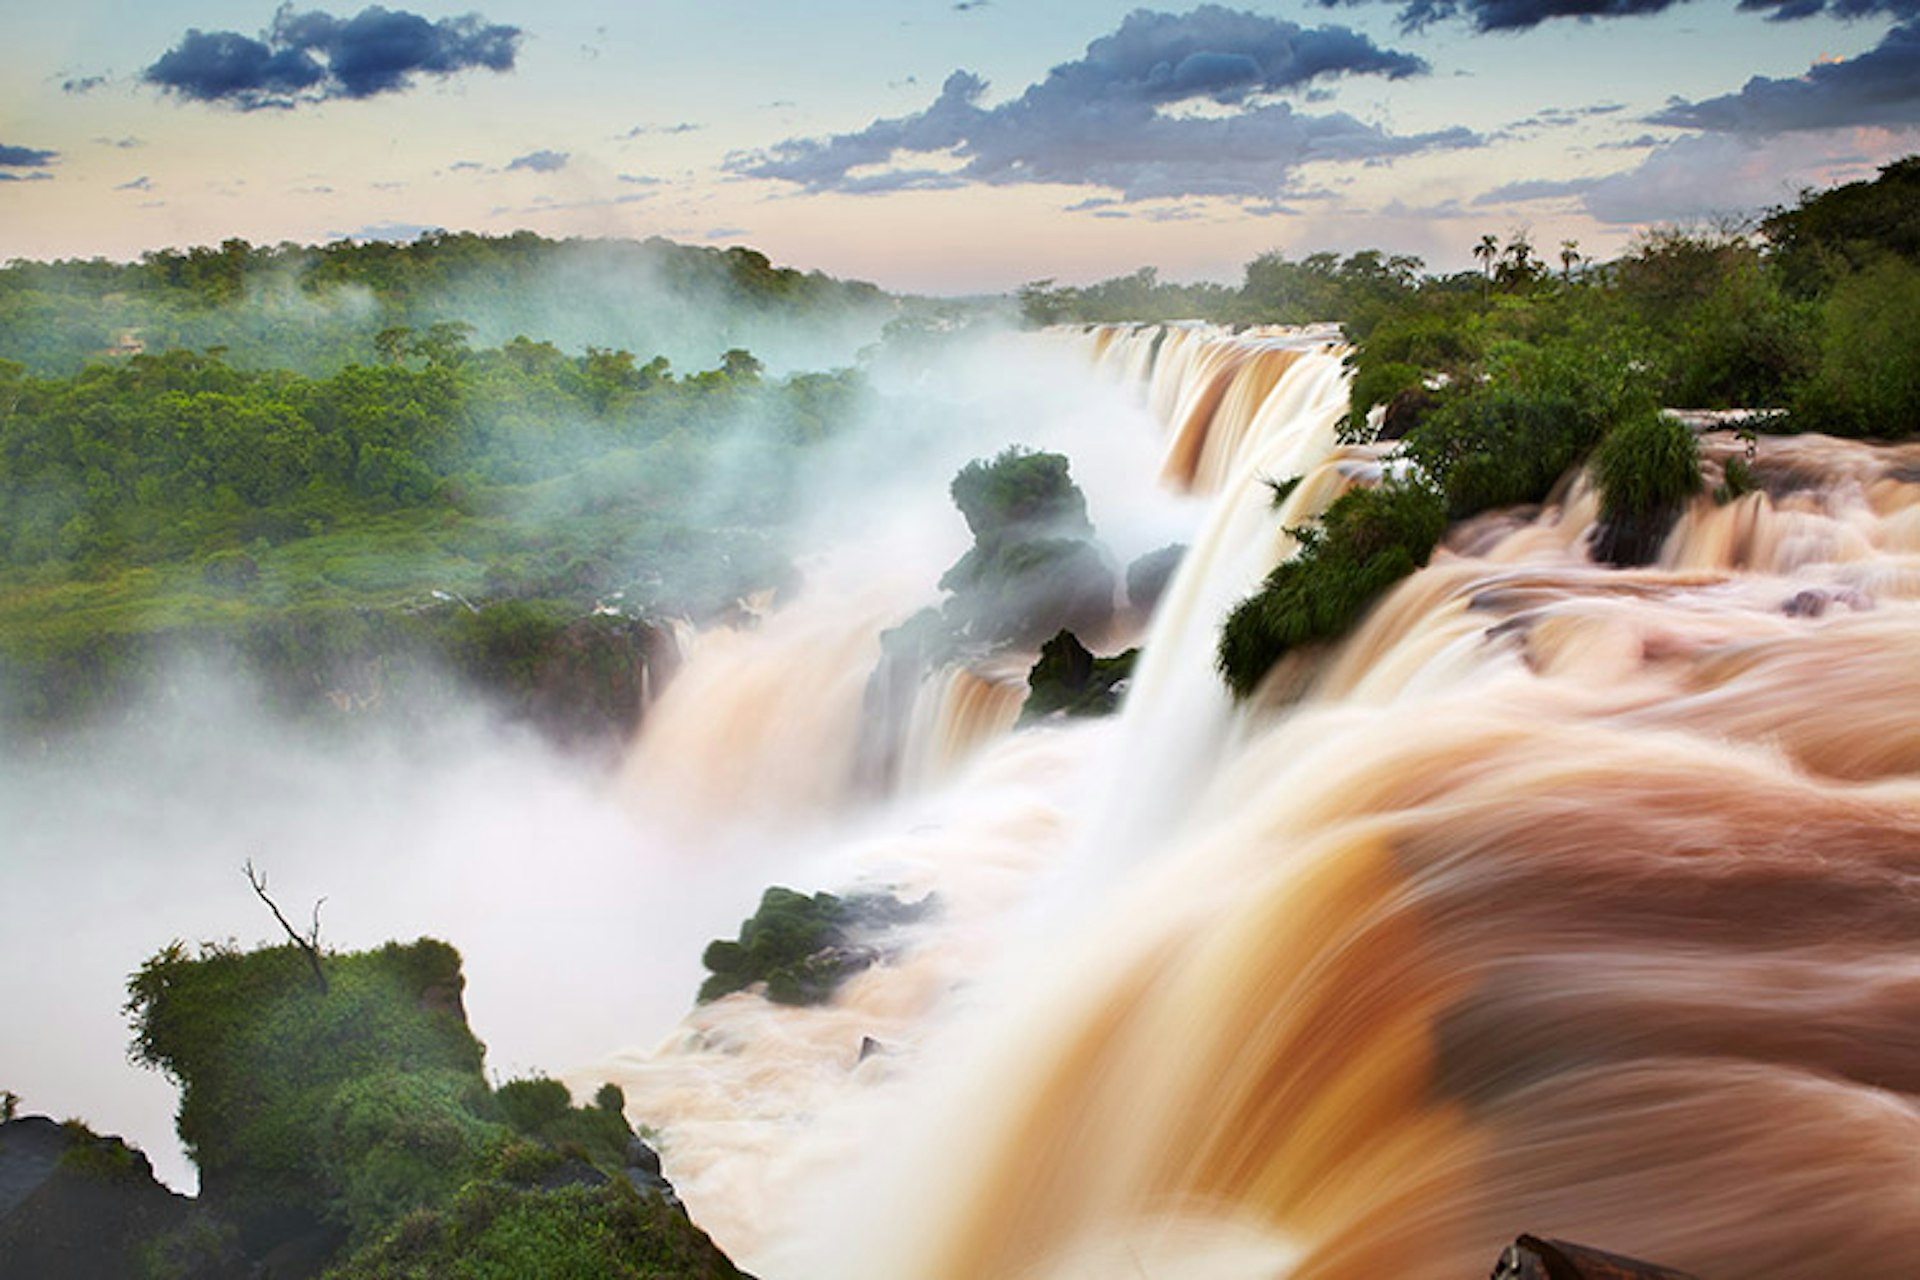 Water pouring over Iguazu Falls.